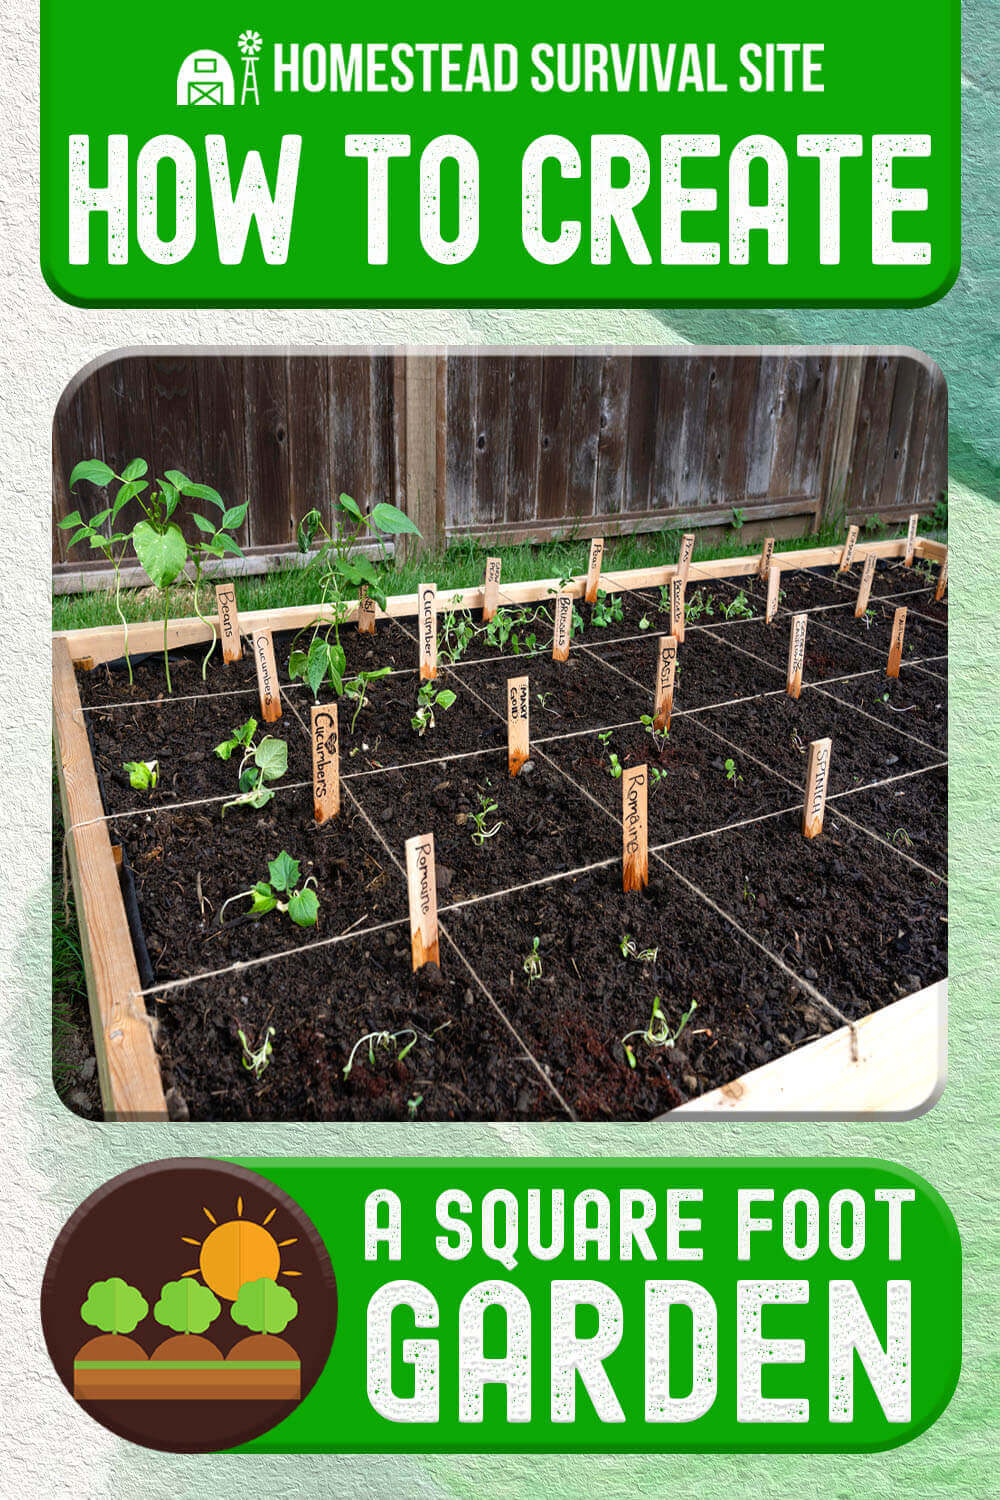 How to Create a Square Foot Garden